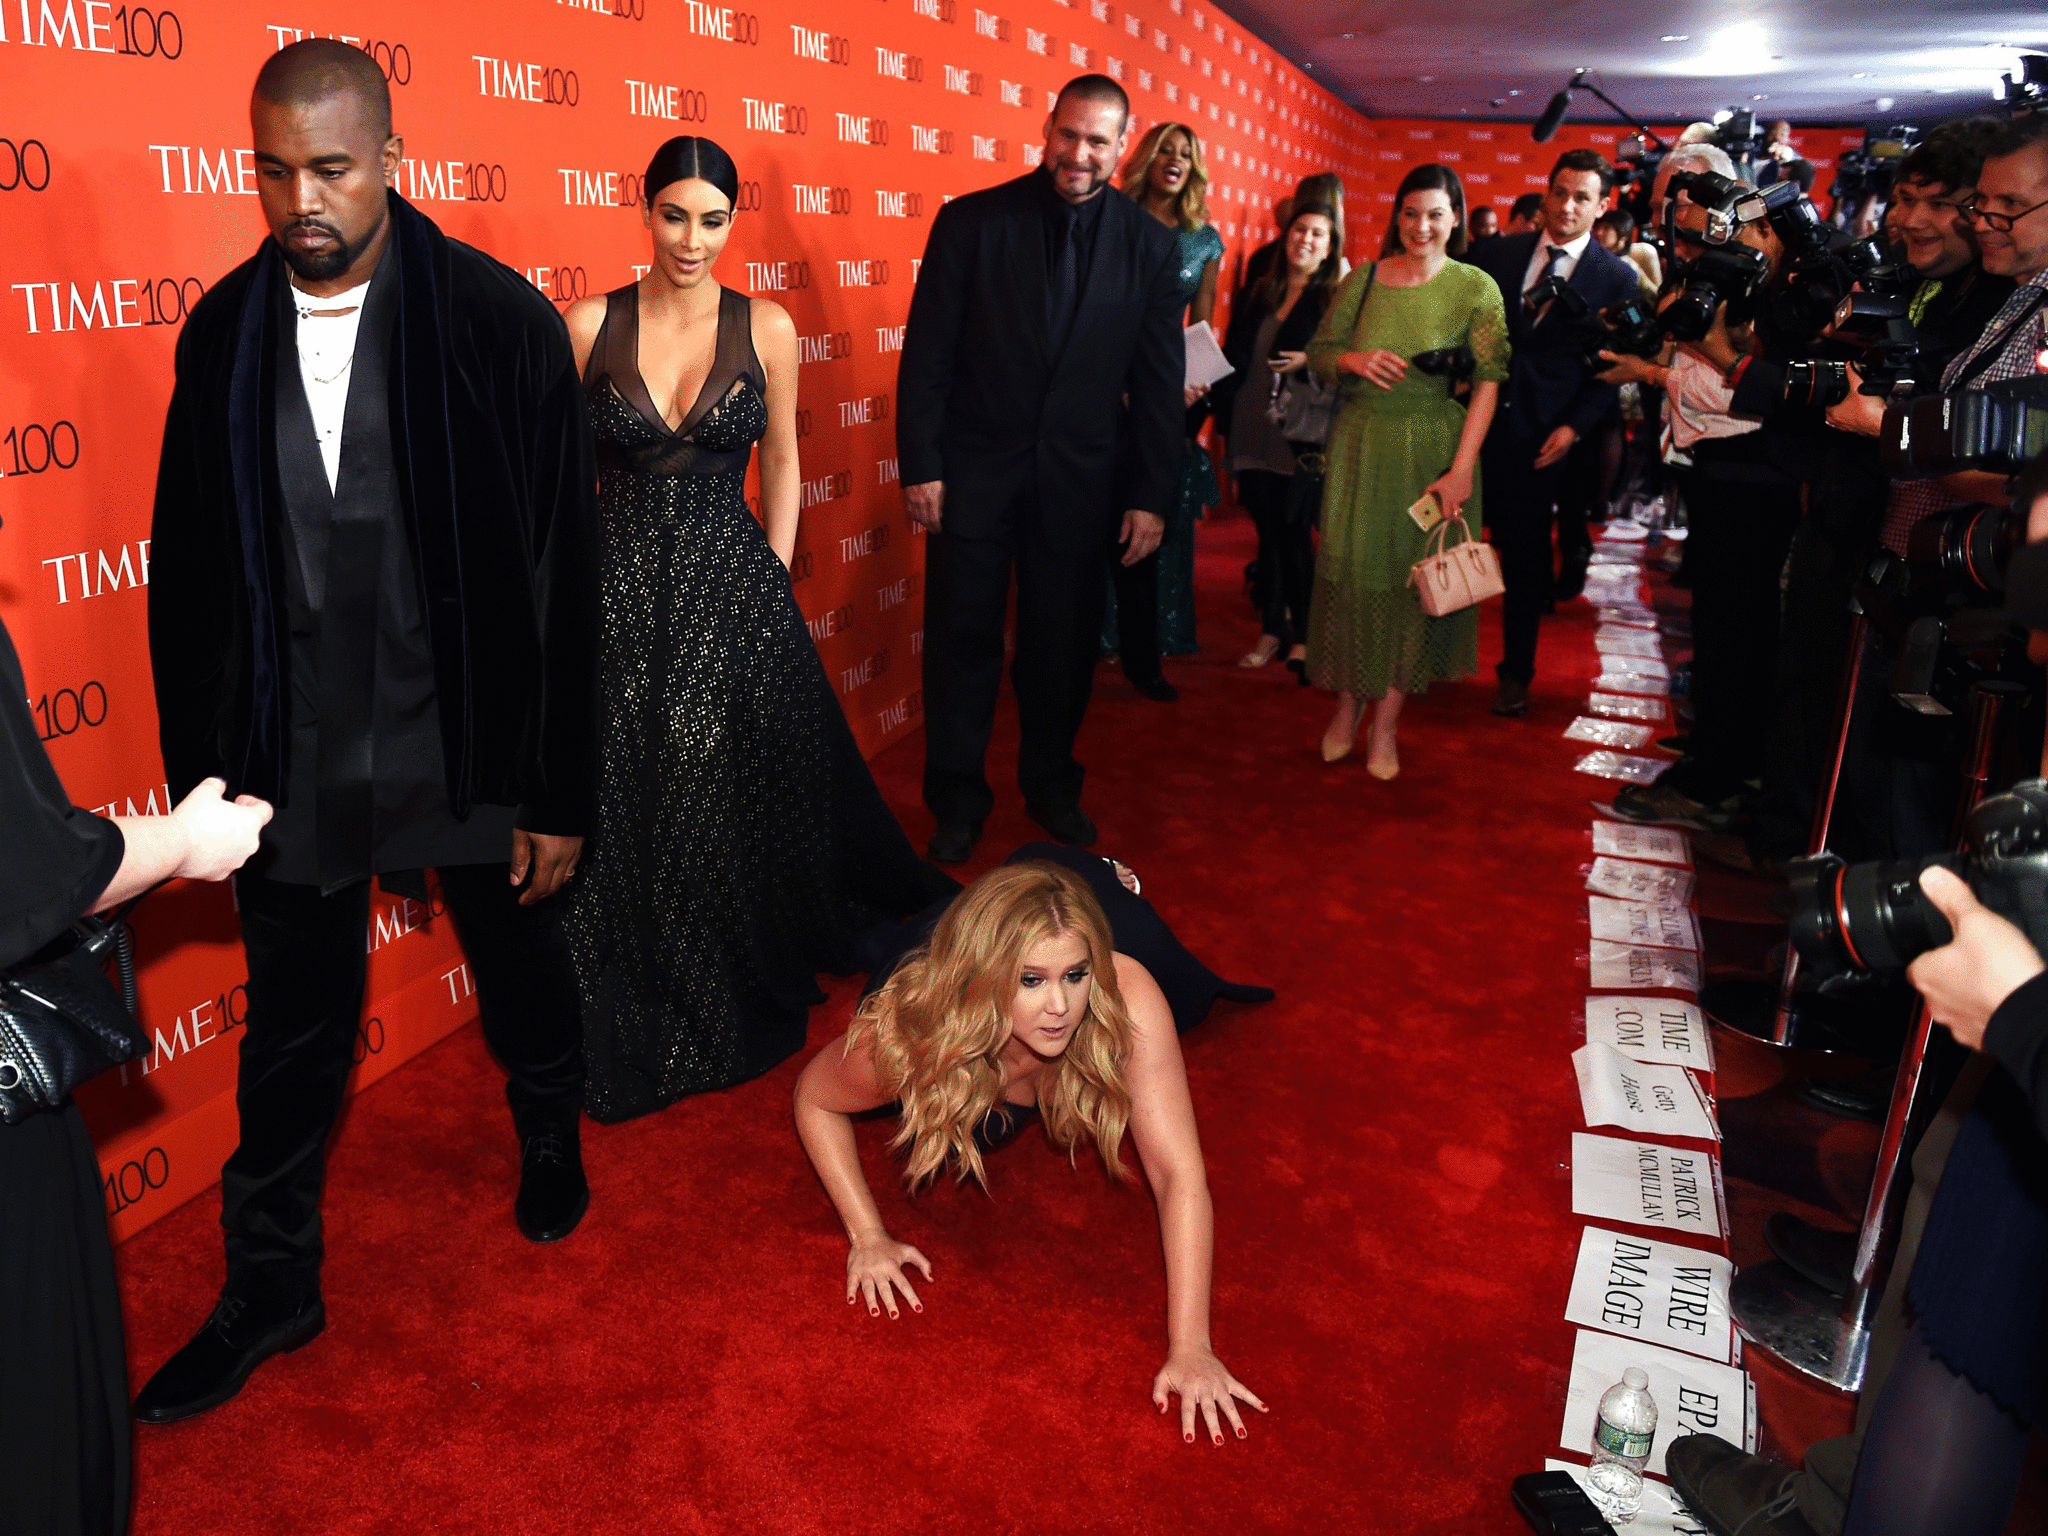 Amy Schumer pretended to fall over in front of Kim Kardashian West and Kanye West before the Time 100 ceremony in April